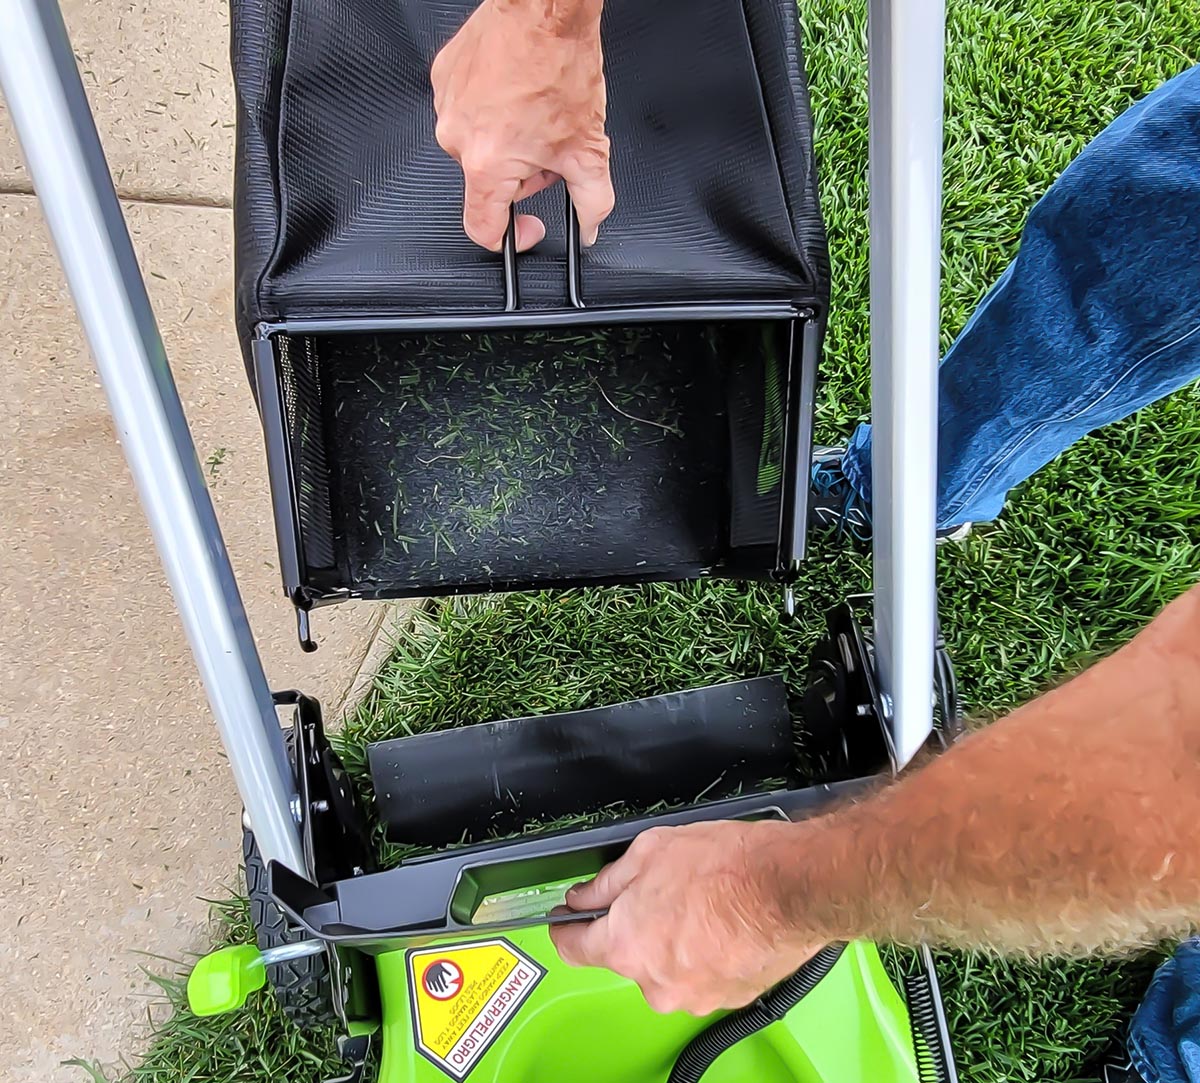 A person removing the rear bag of the Greenworks Pro 60V 21-Inch Battery Lawn Mower